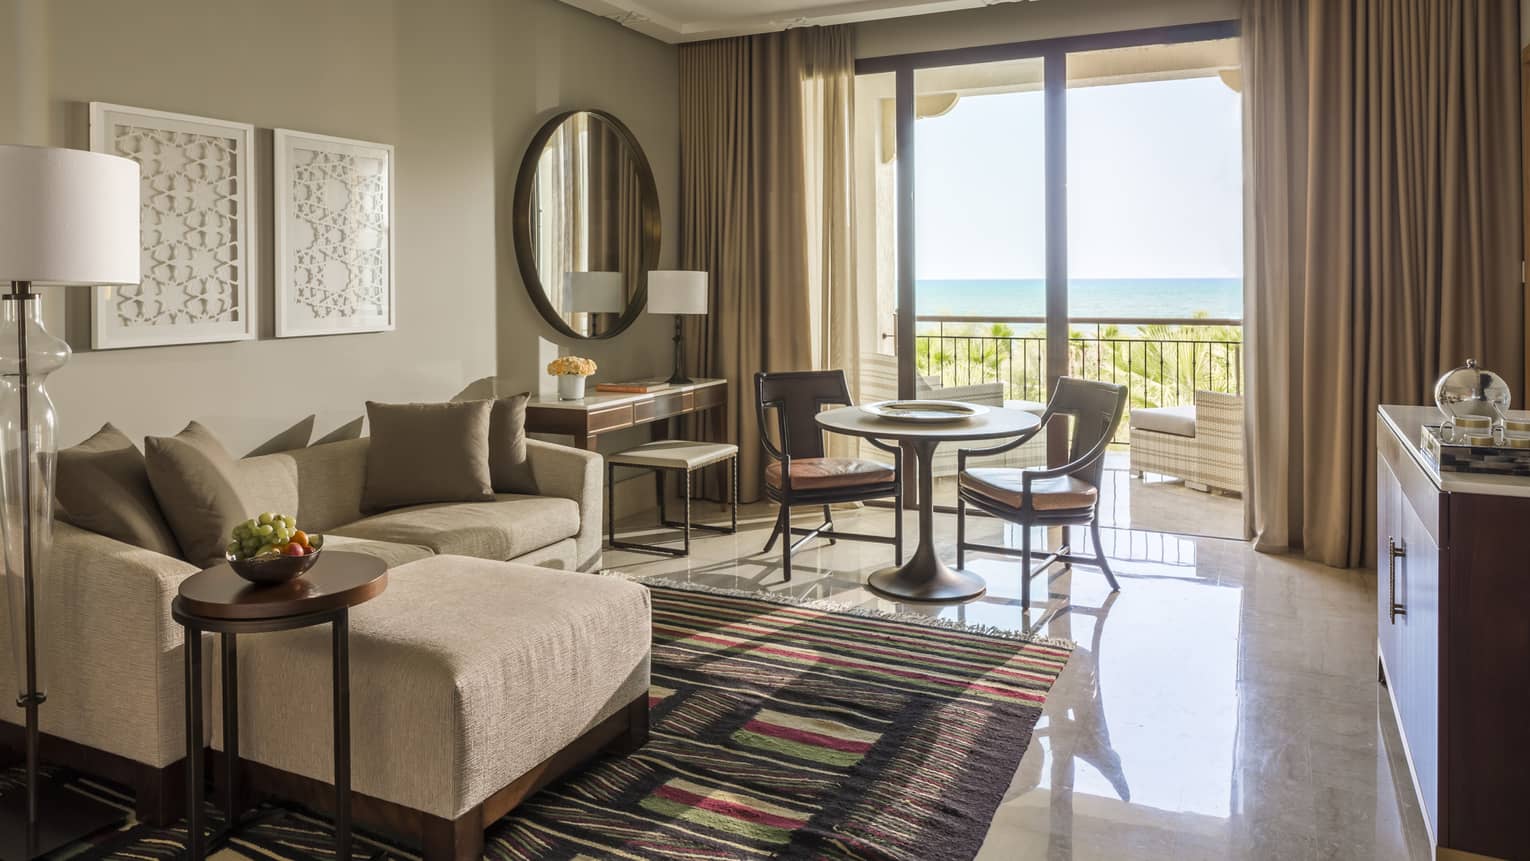 Deluxe Sea View hotel room with modular sofa, small table and chairs by sunny balcony doors